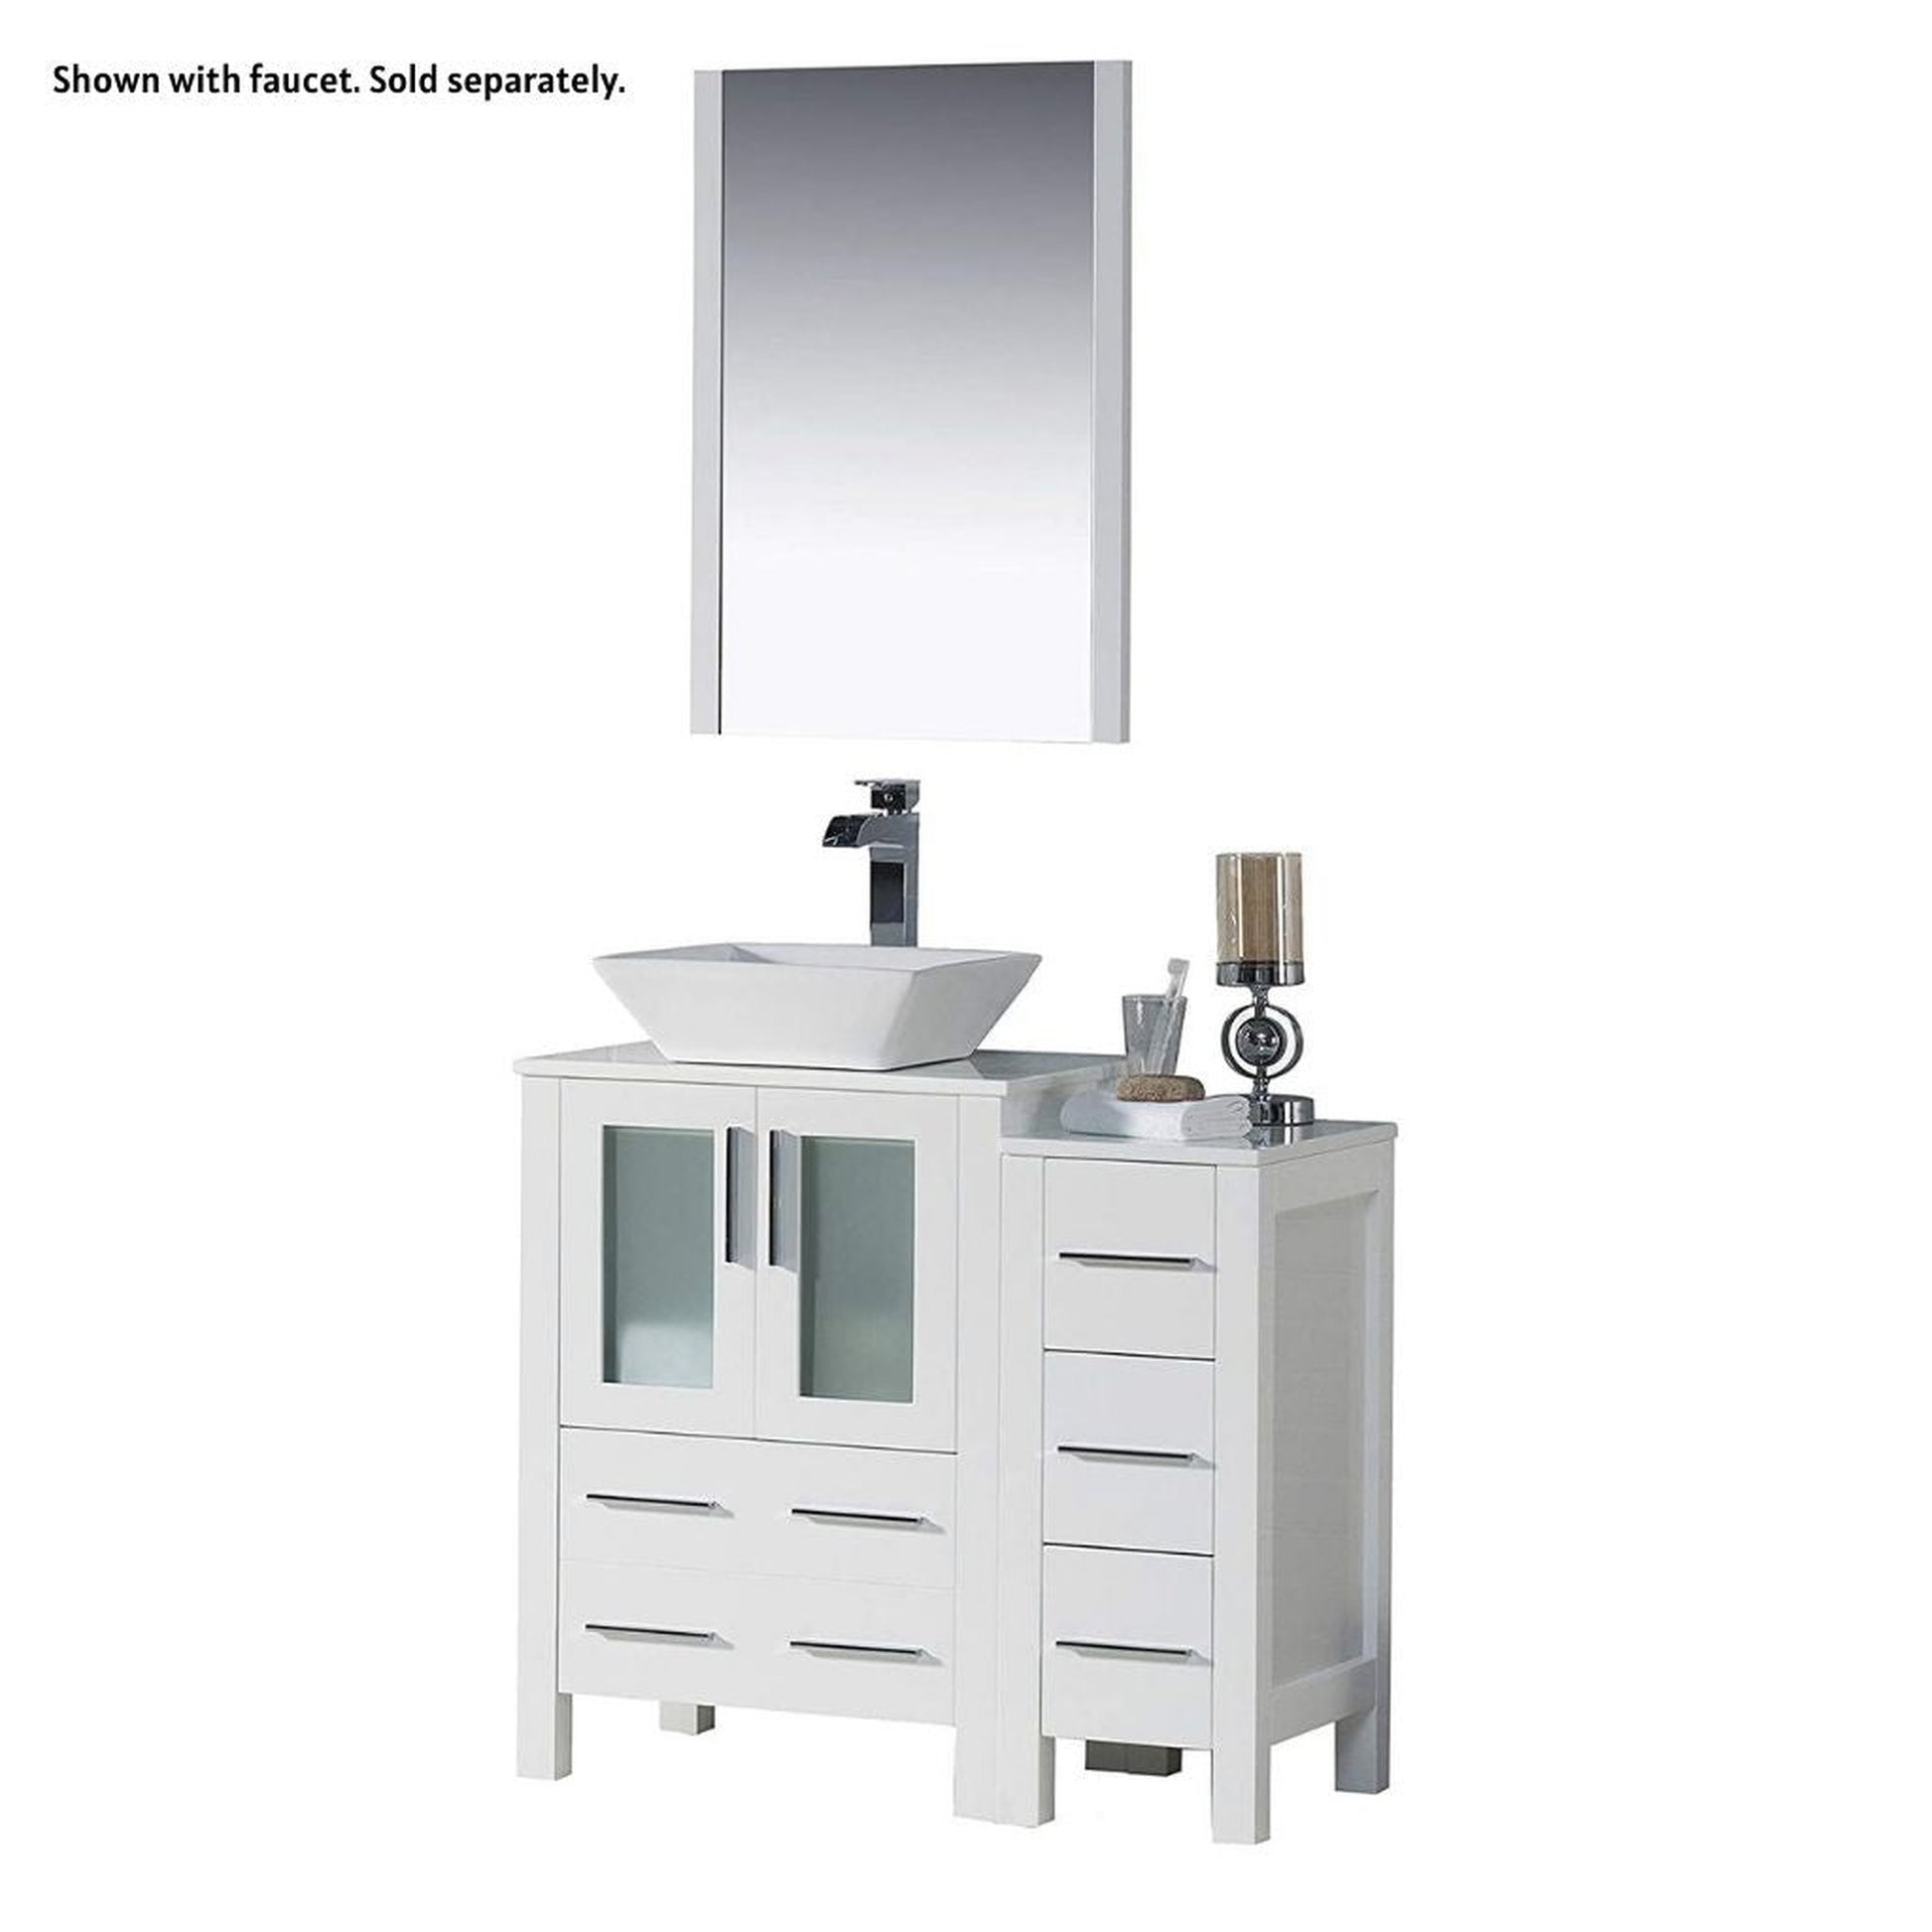 Blossom Sydney 36" White Freestanding Vanity Set With Ceramic Vessel Single Sink, Mirror and Side Cabinet